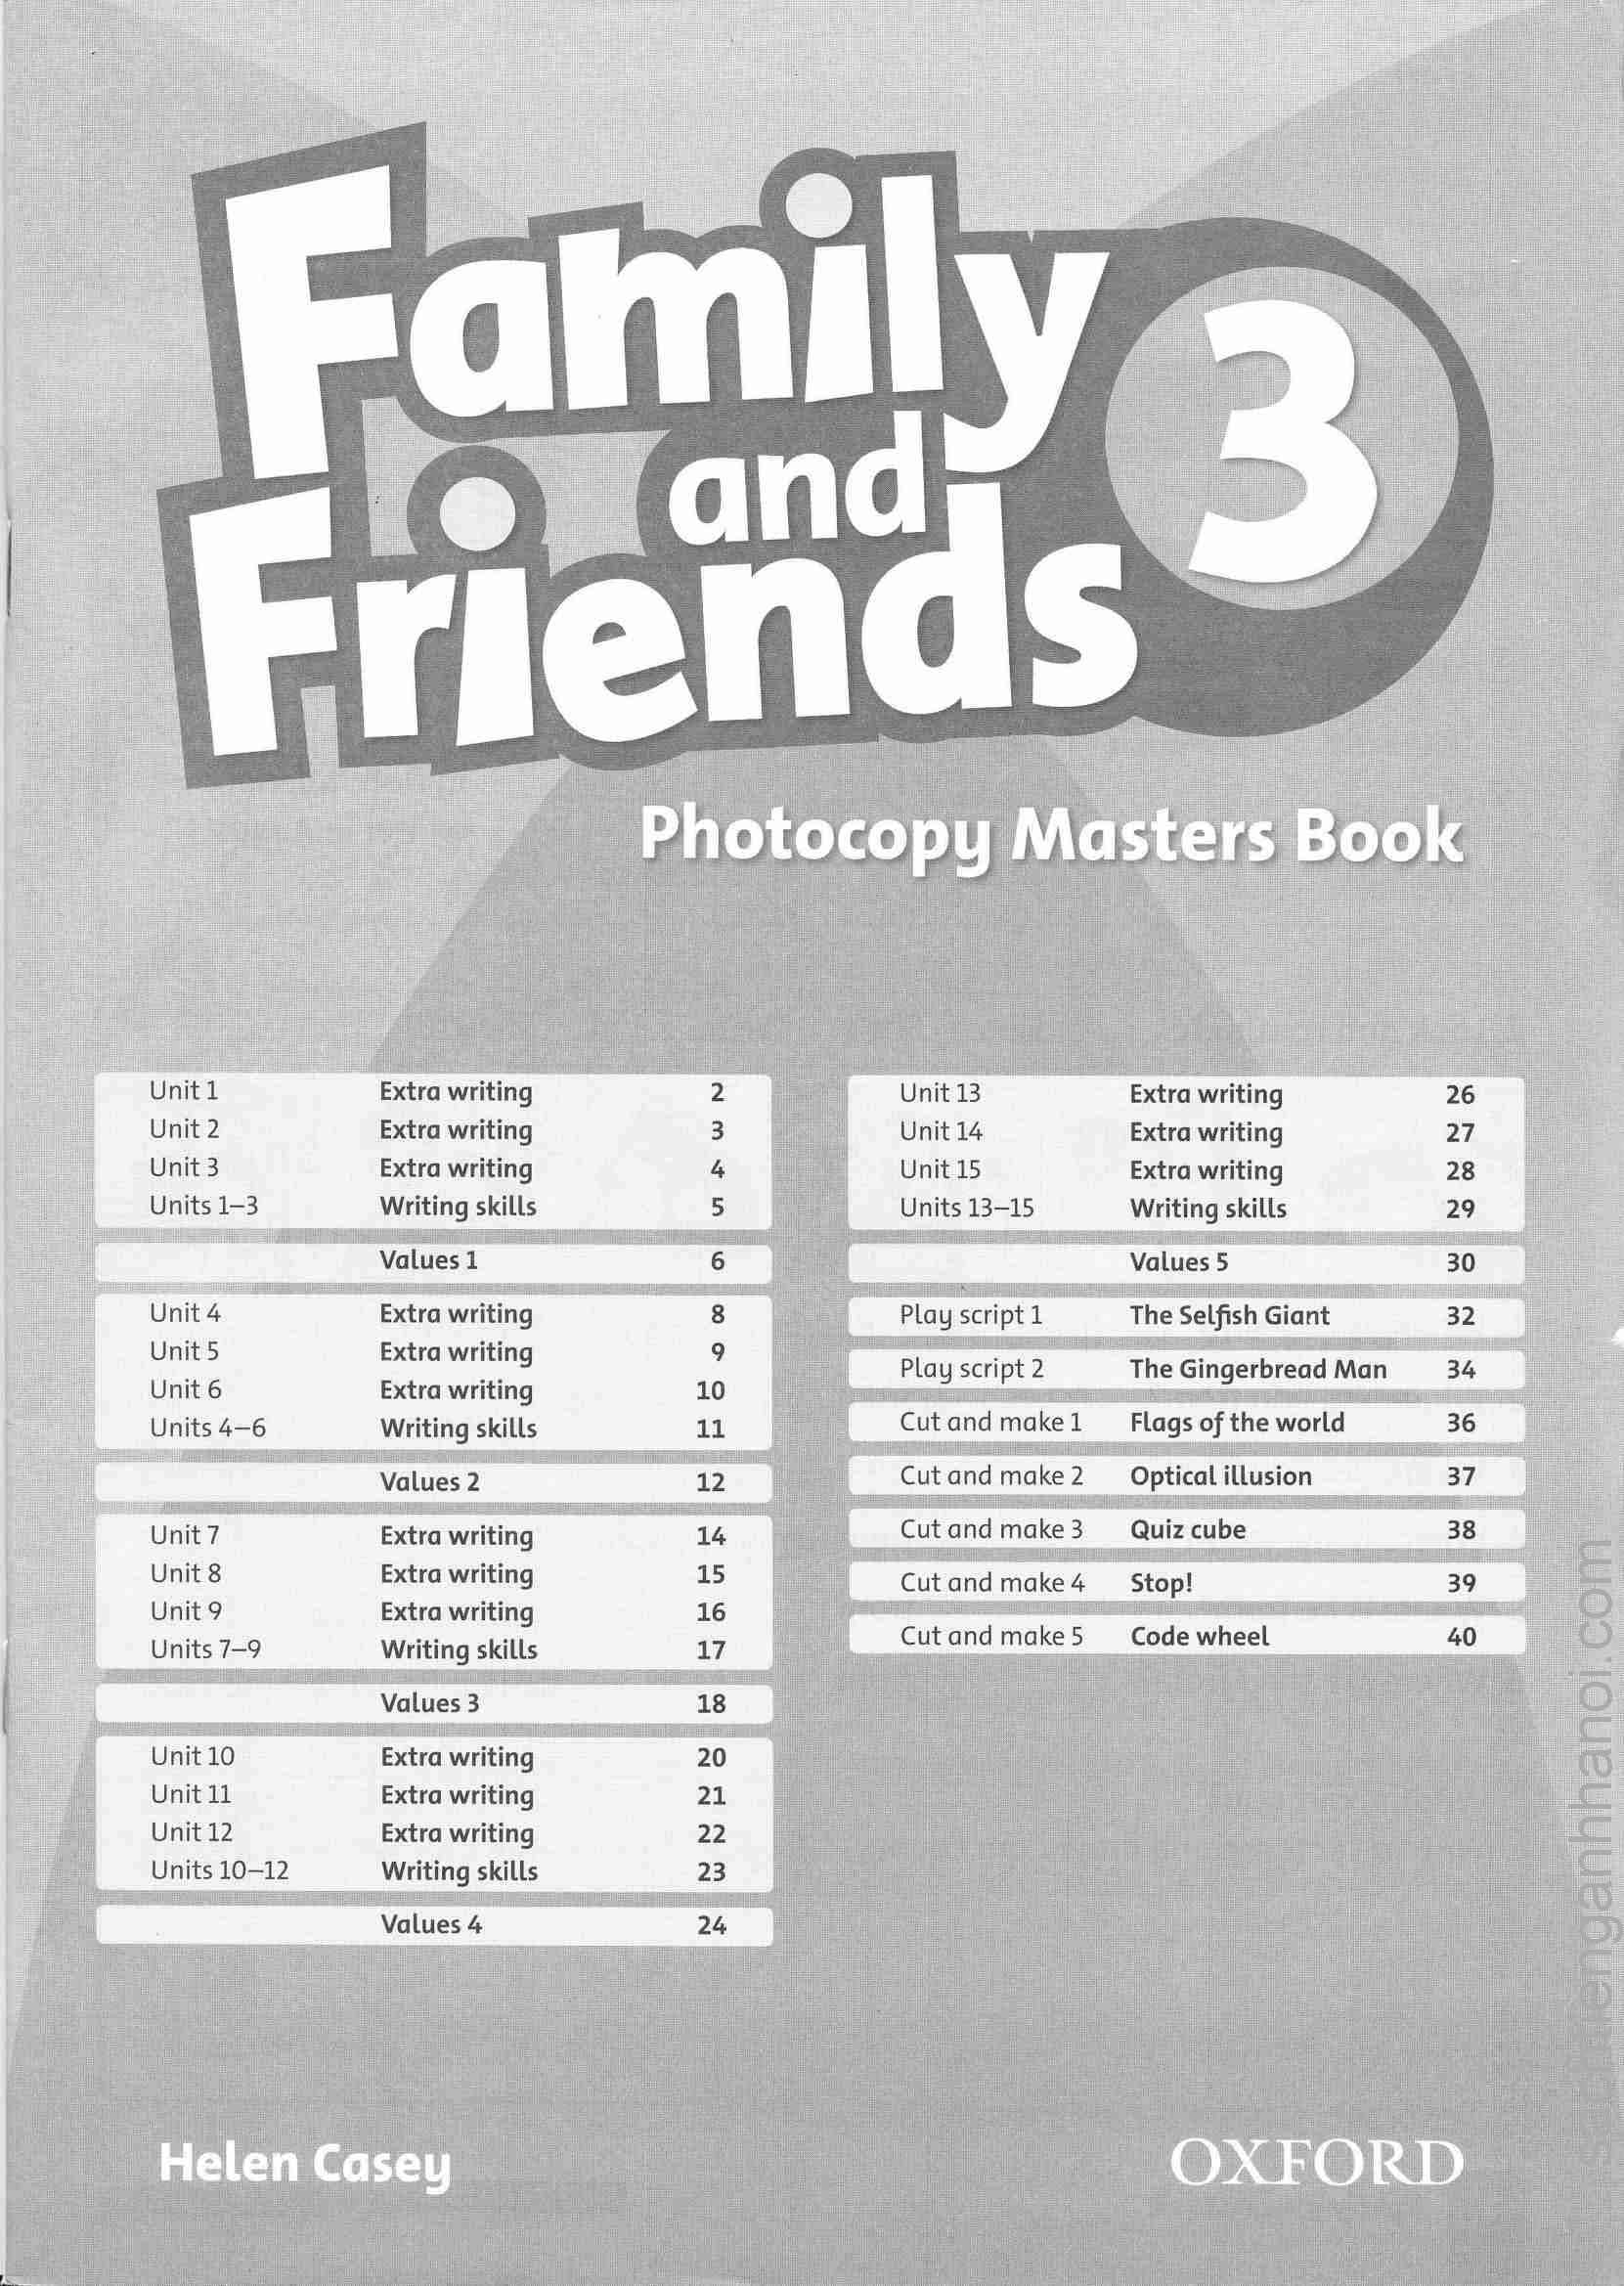 Friends 3 test book. Family and friends 4. Family and friends 3 Test Unit 4. Family and friends book. Английский Family and friends 3.